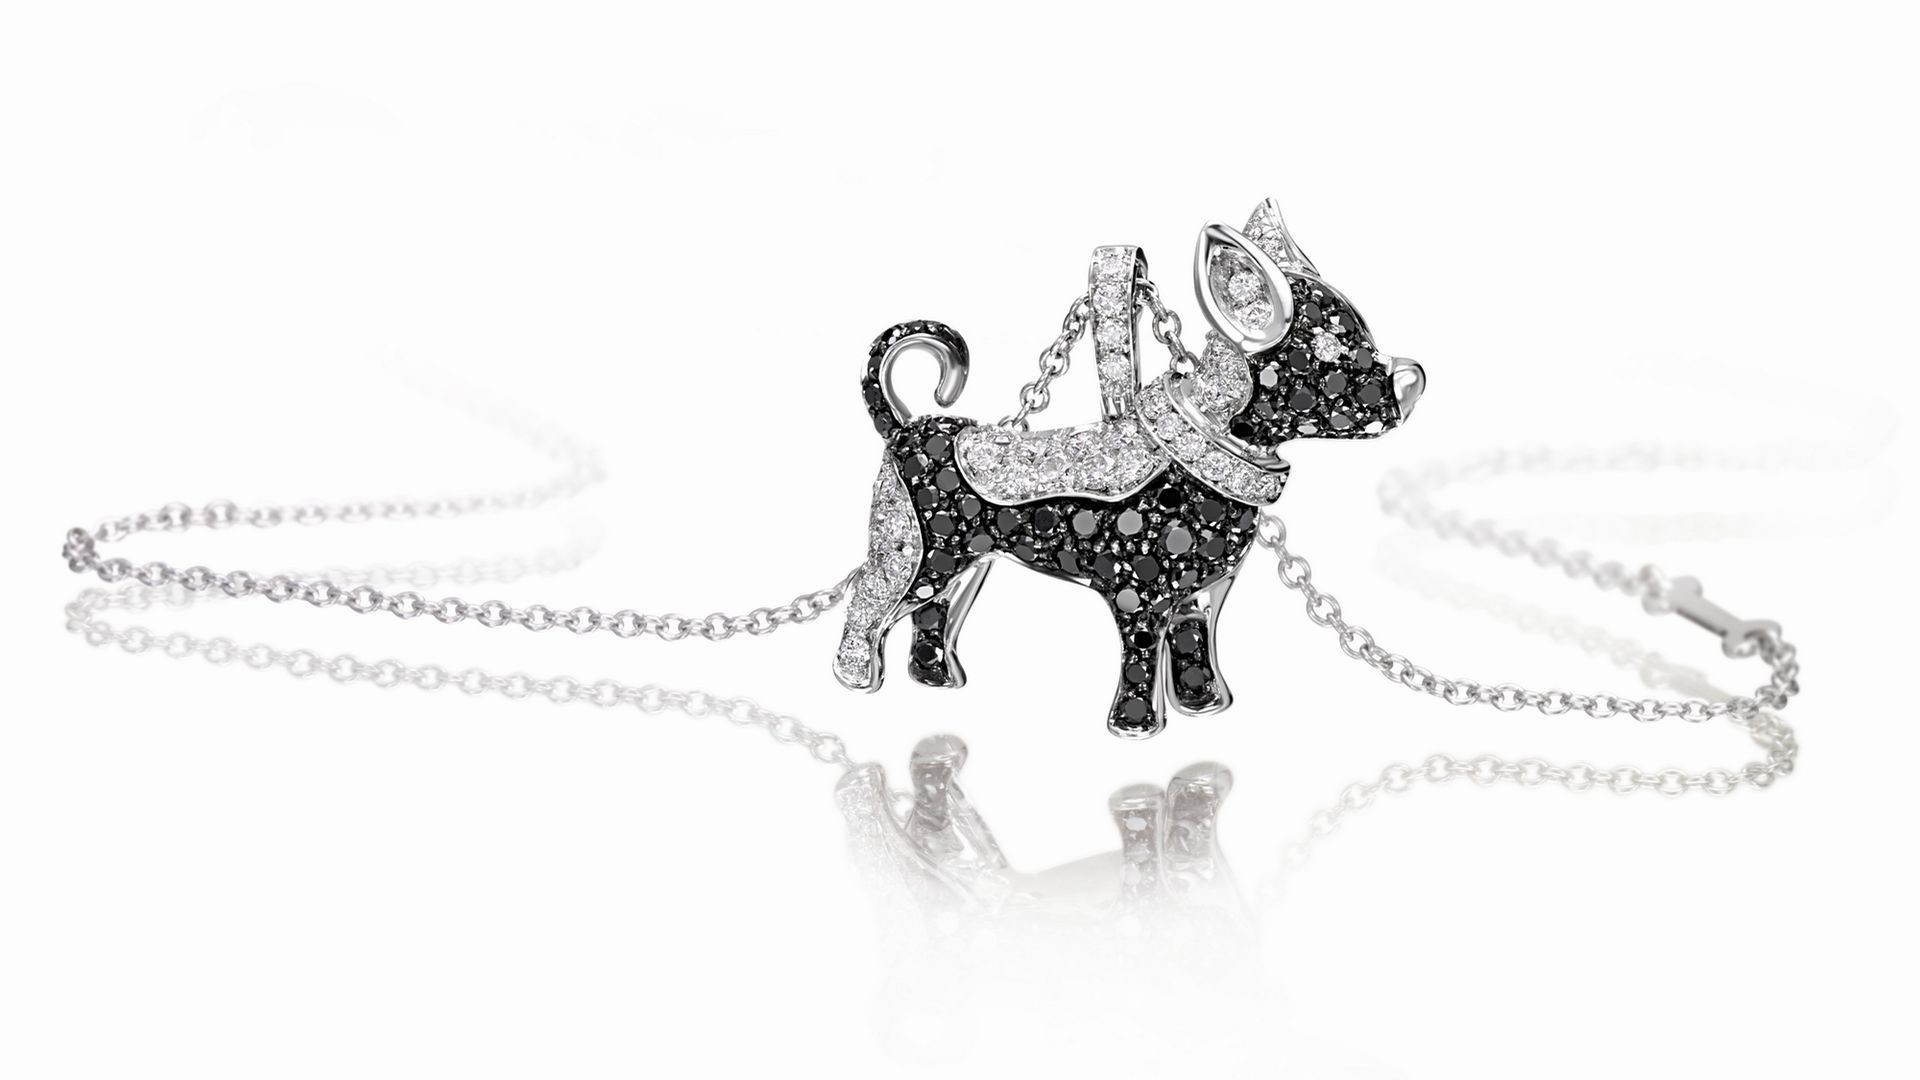 necklace with dog-shaped pendant and precious stones